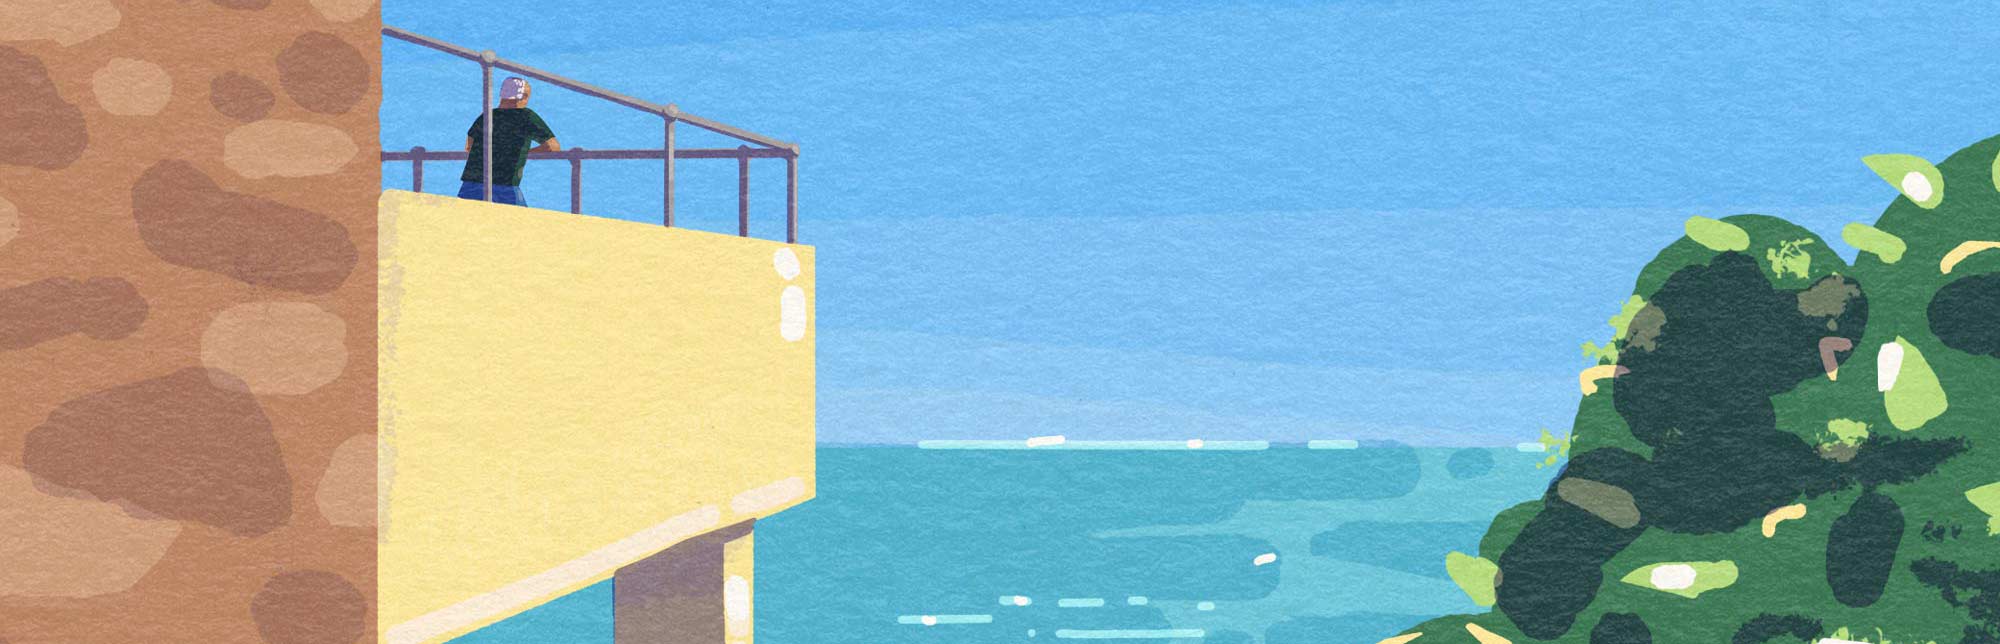 Section from Beach Lookout illustration by Elly Jahnz